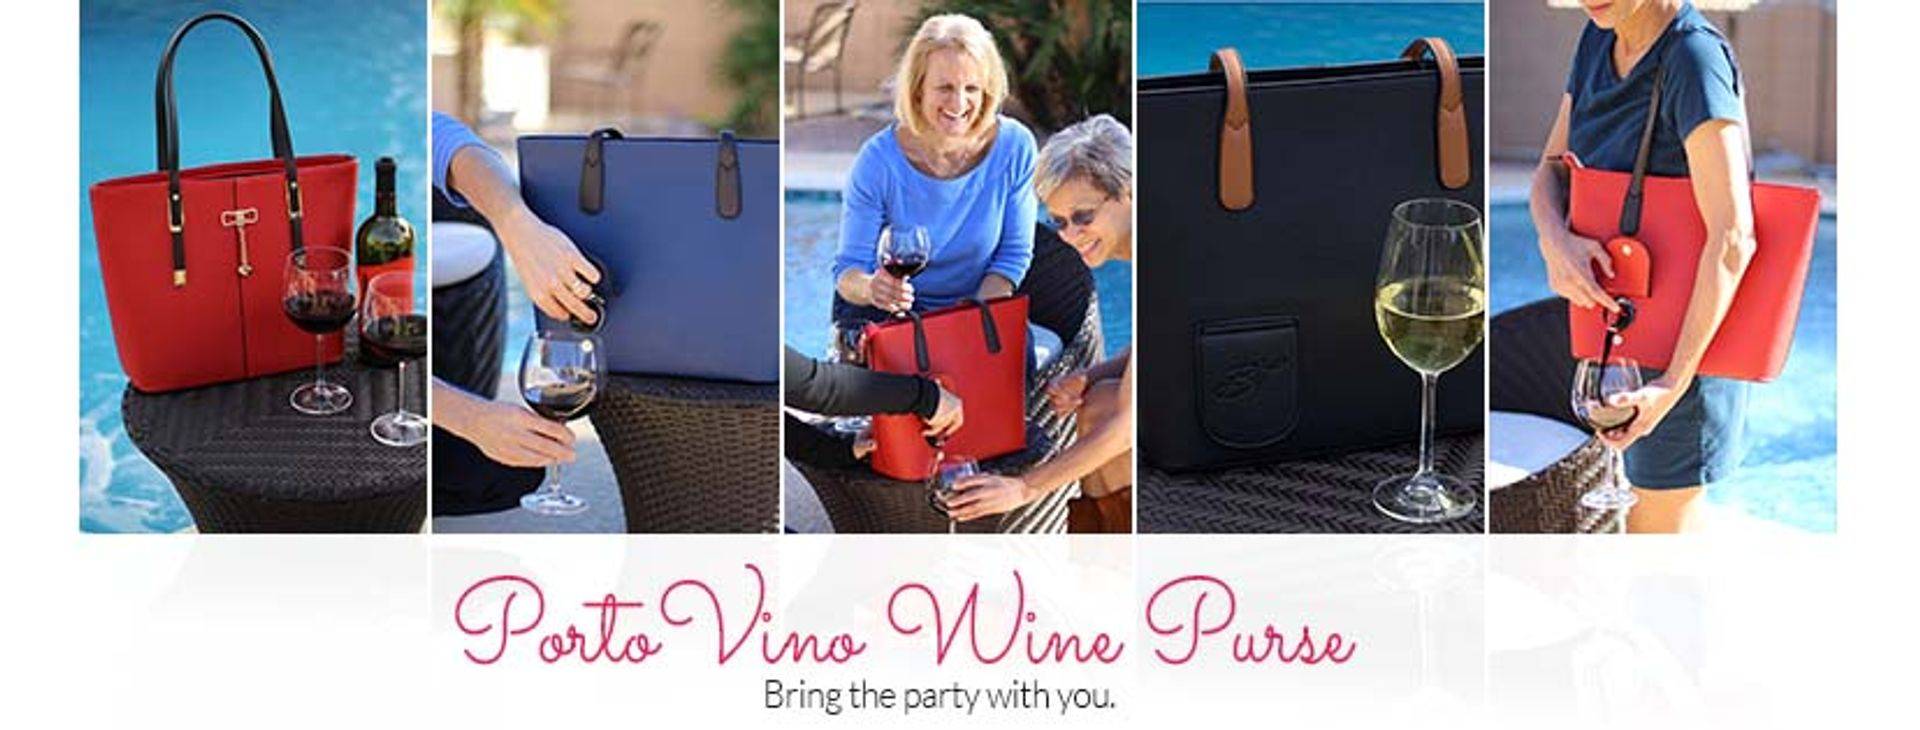 Large Wine Black Tote Bag Offer - Wowcher